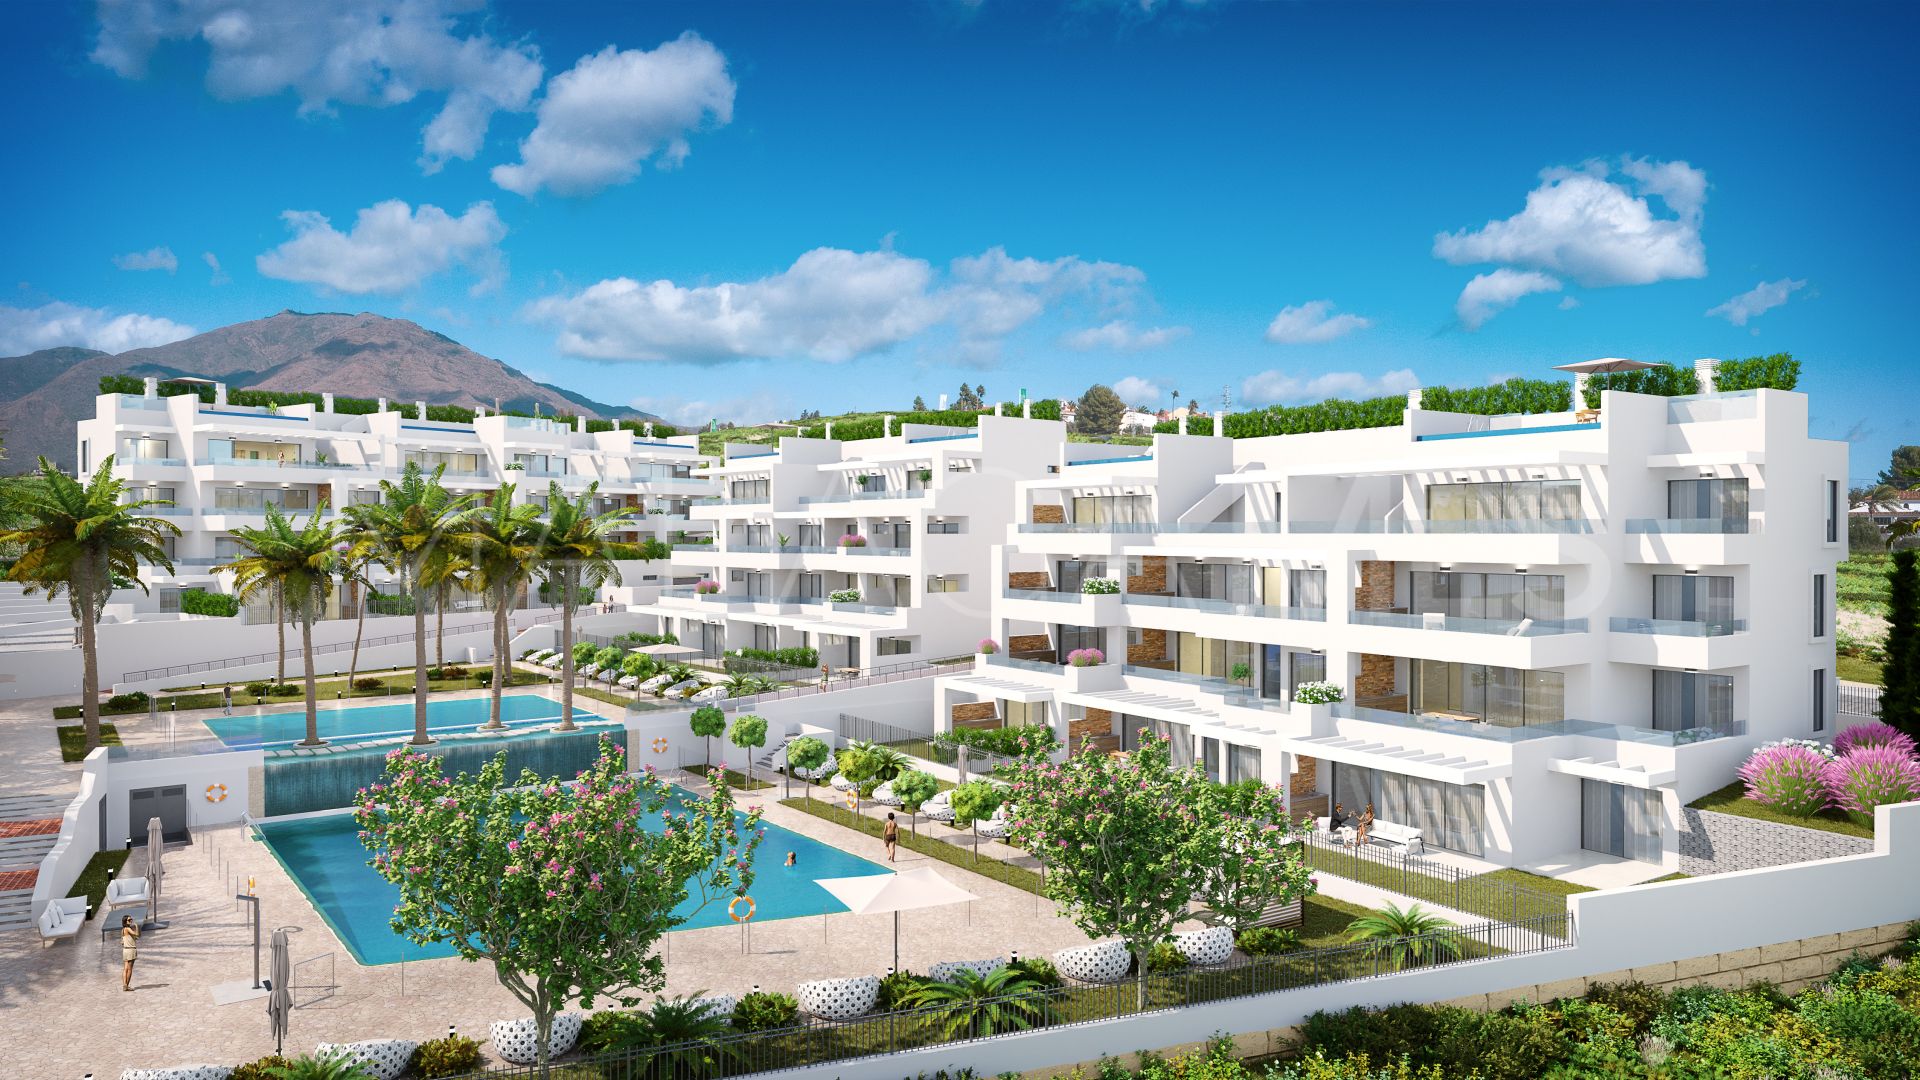 Atico for sale with 4 bedrooms in Estepona